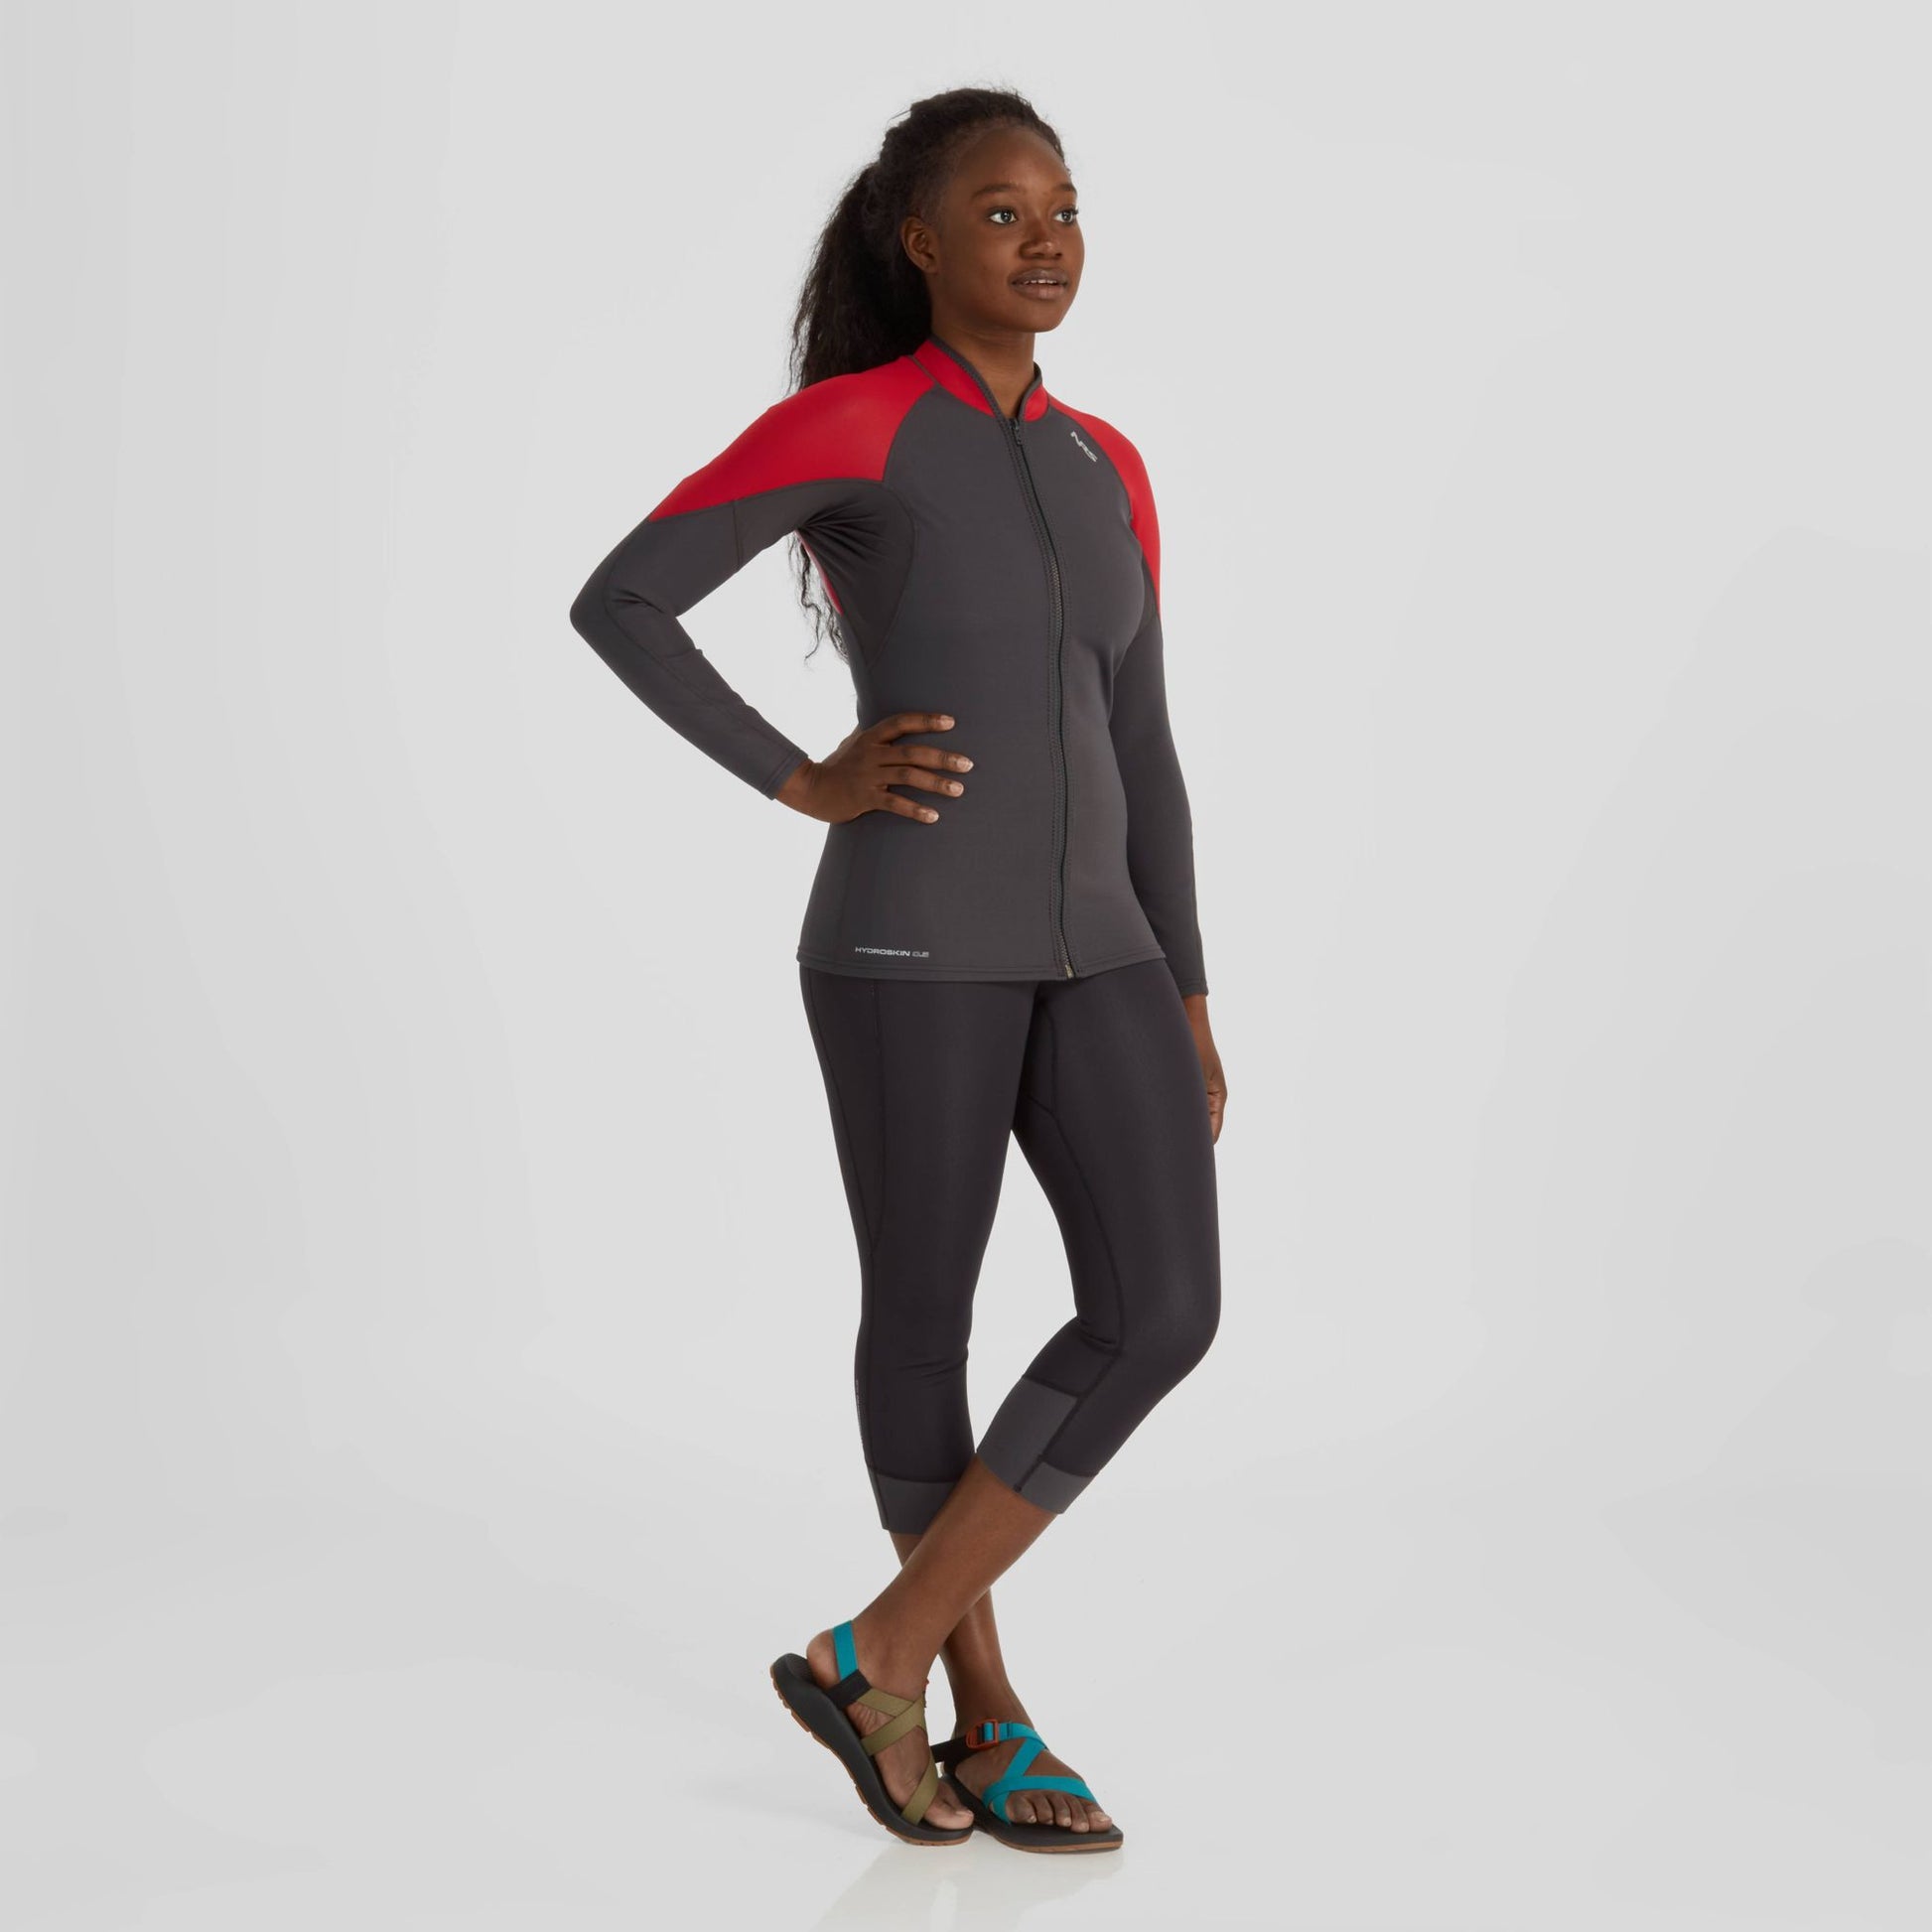 A woman is posing for a photo in a gray and red NRS Hydroskin 0.5 Jacket - Women's, showcasing her layering arsenal.